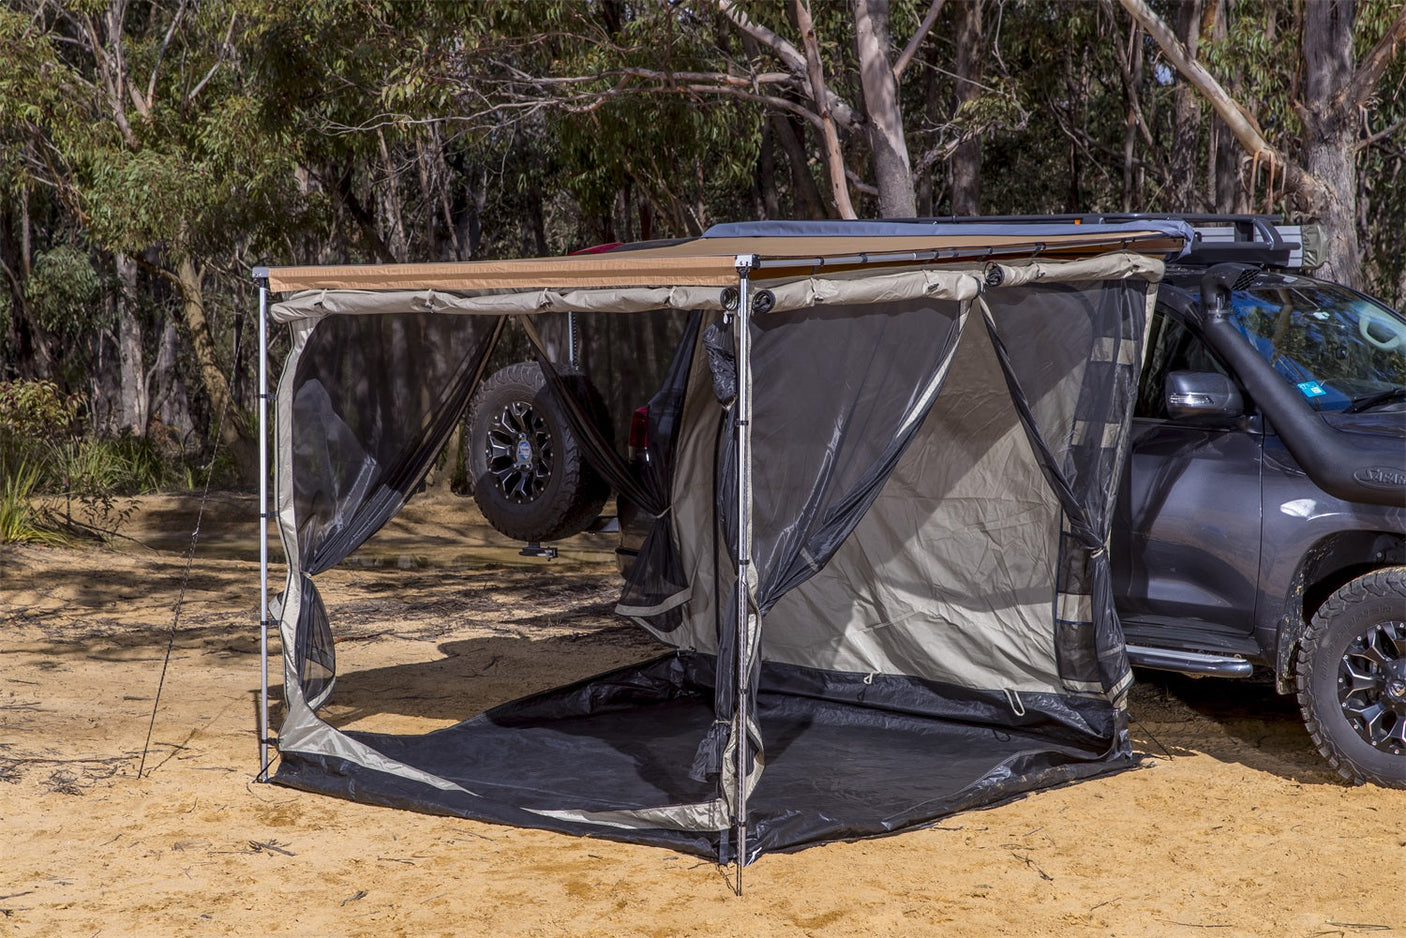 ARB Deluxe Awning Room With Floor 6.5 FT